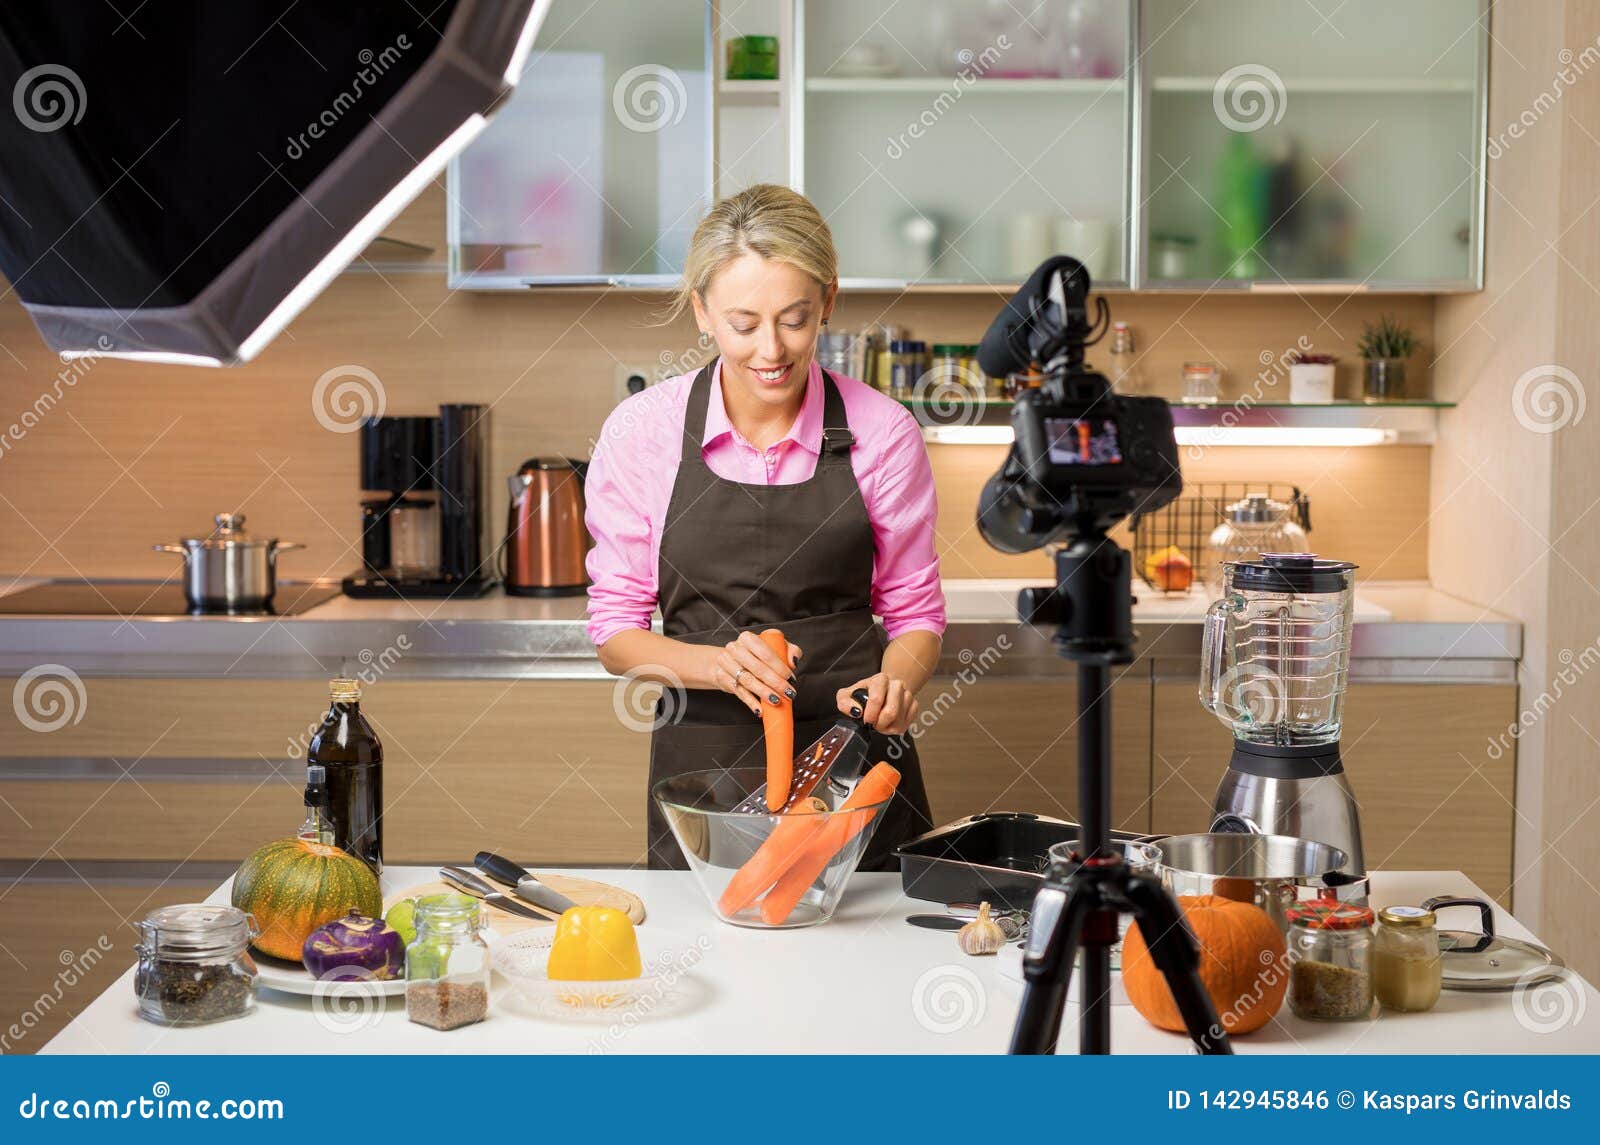 woman filming cooking vlog. concept of vlogging, blogging and content creation